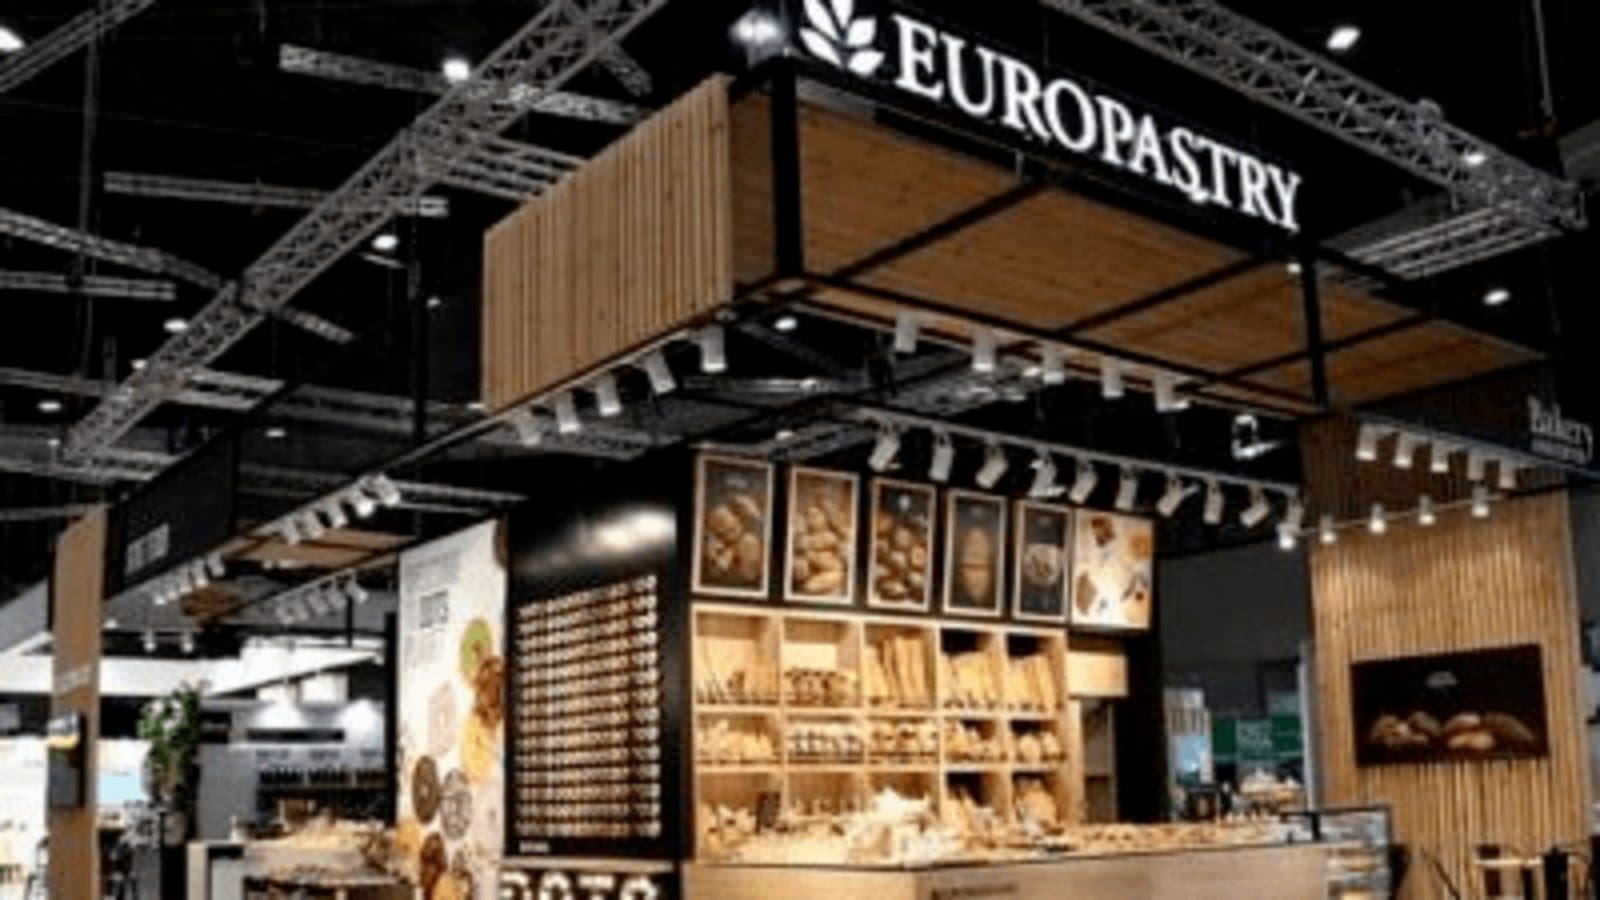 Europastry bulks up European frozen bakery business with assets from Dawn Foods